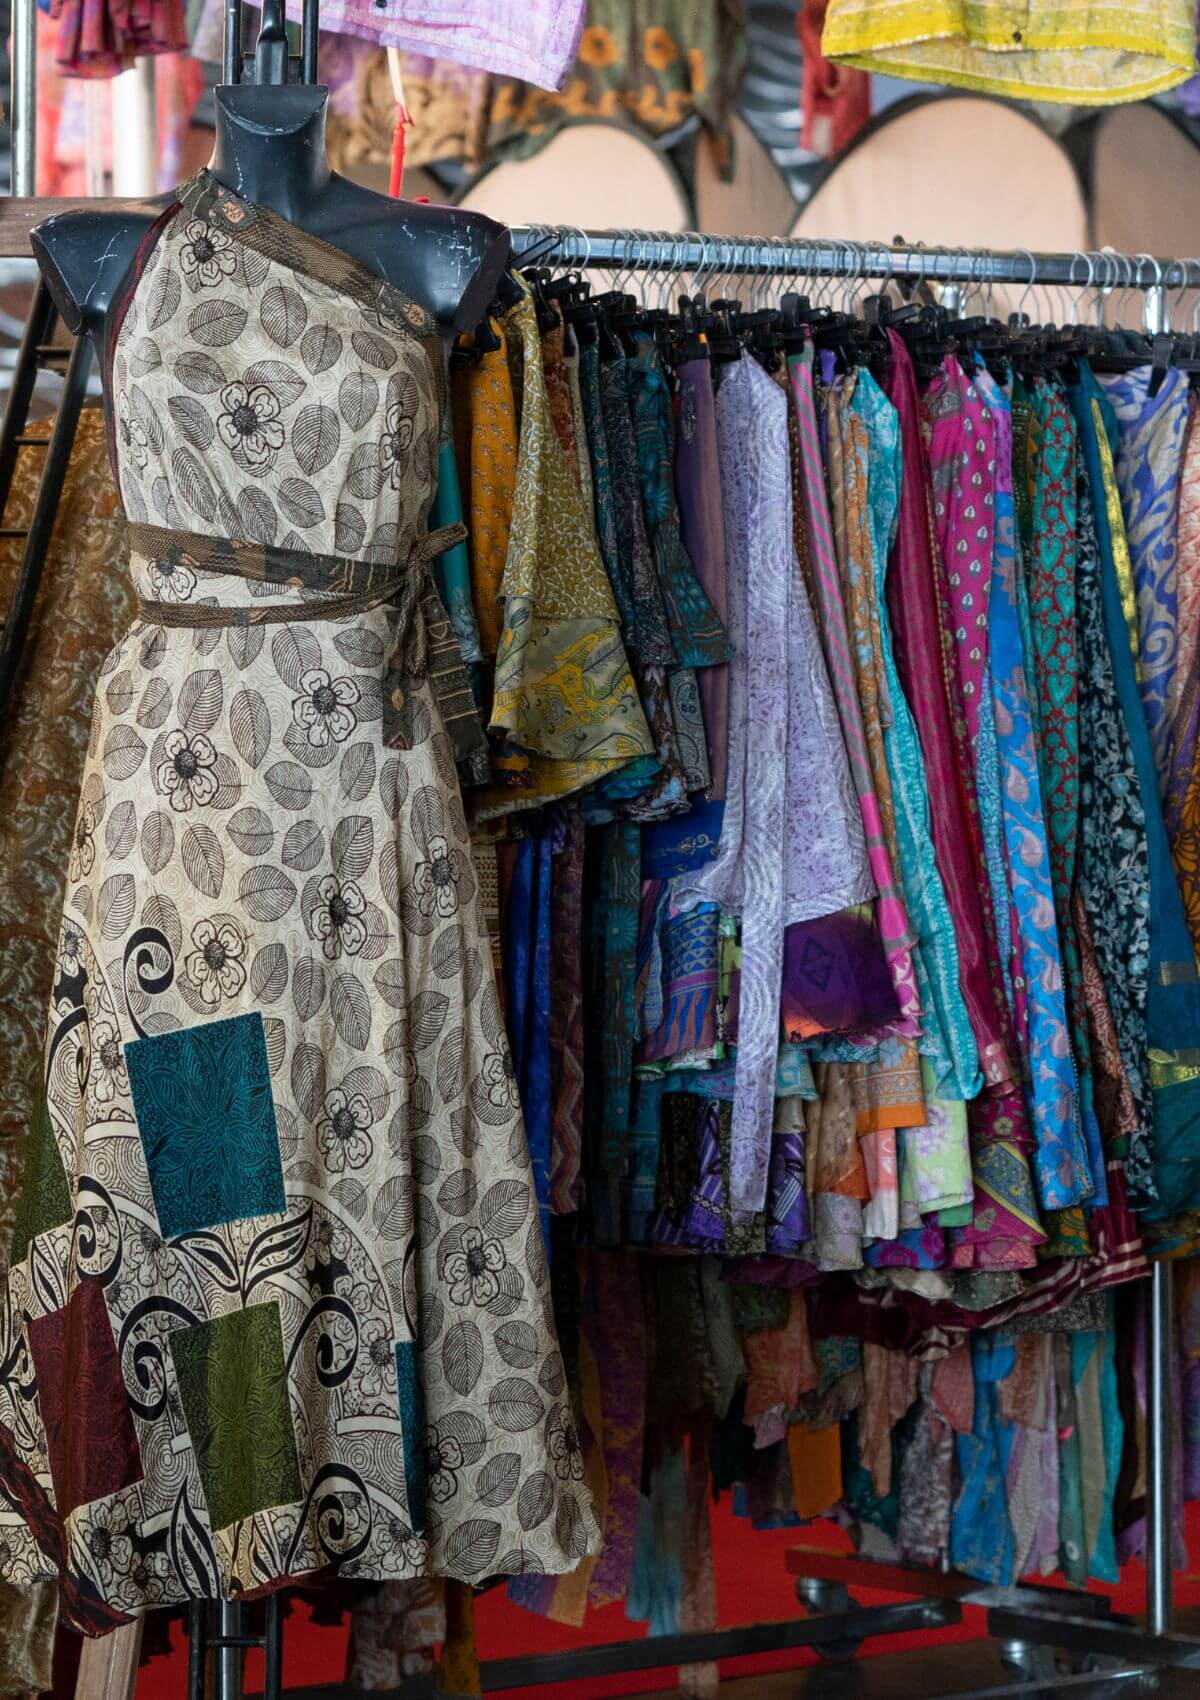 Stylish clothing from India as souvenirs